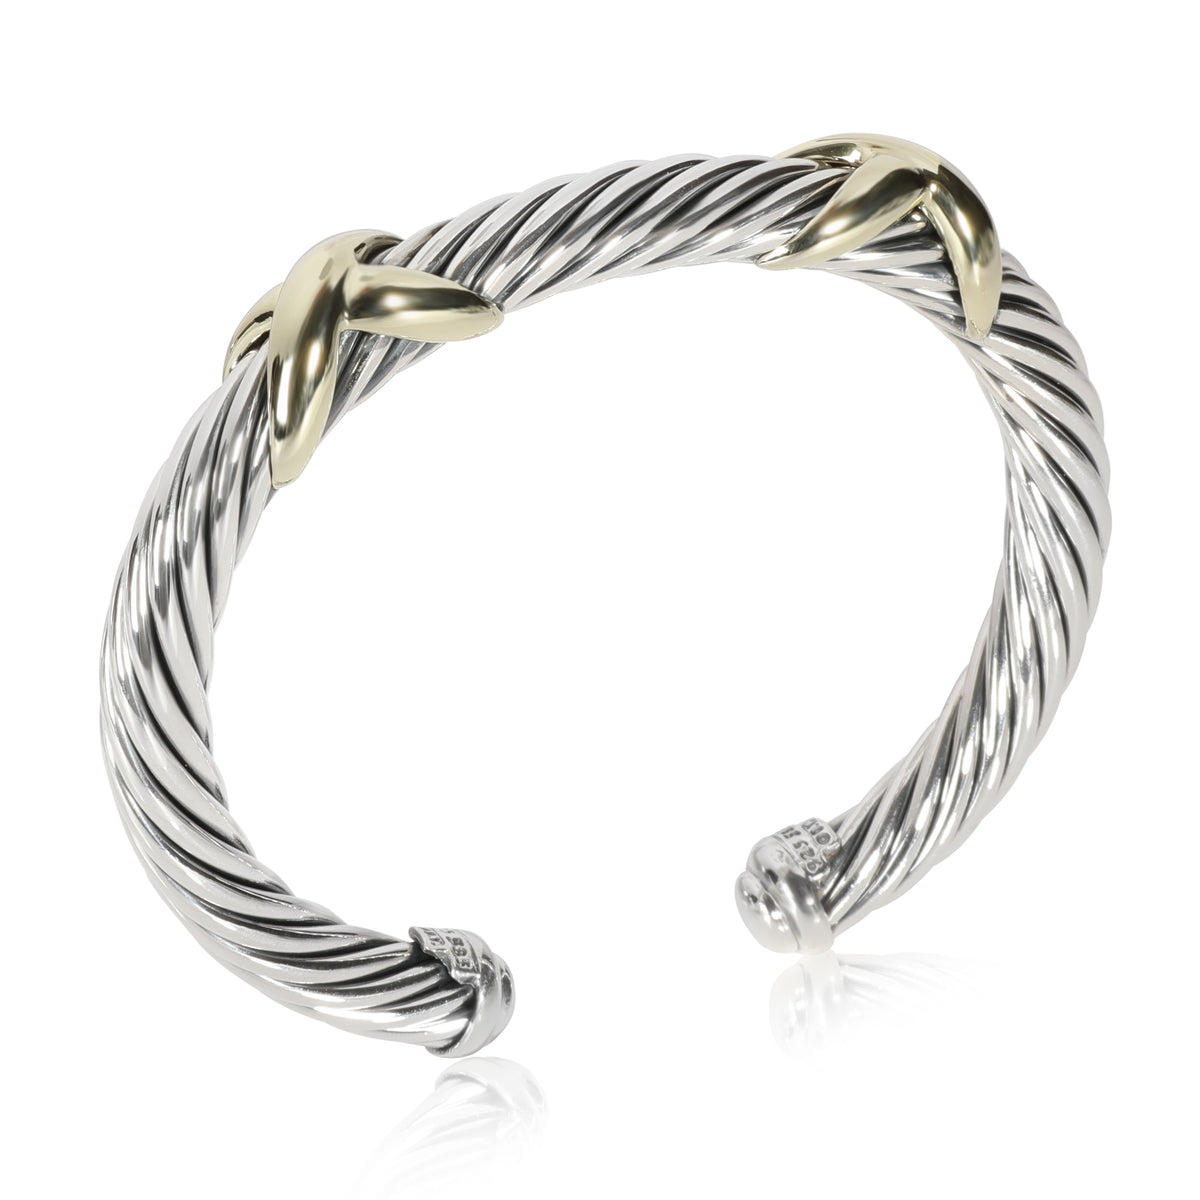 David Yurman Cable X Bangle in 14K Yellow Gold/Sterling Silver